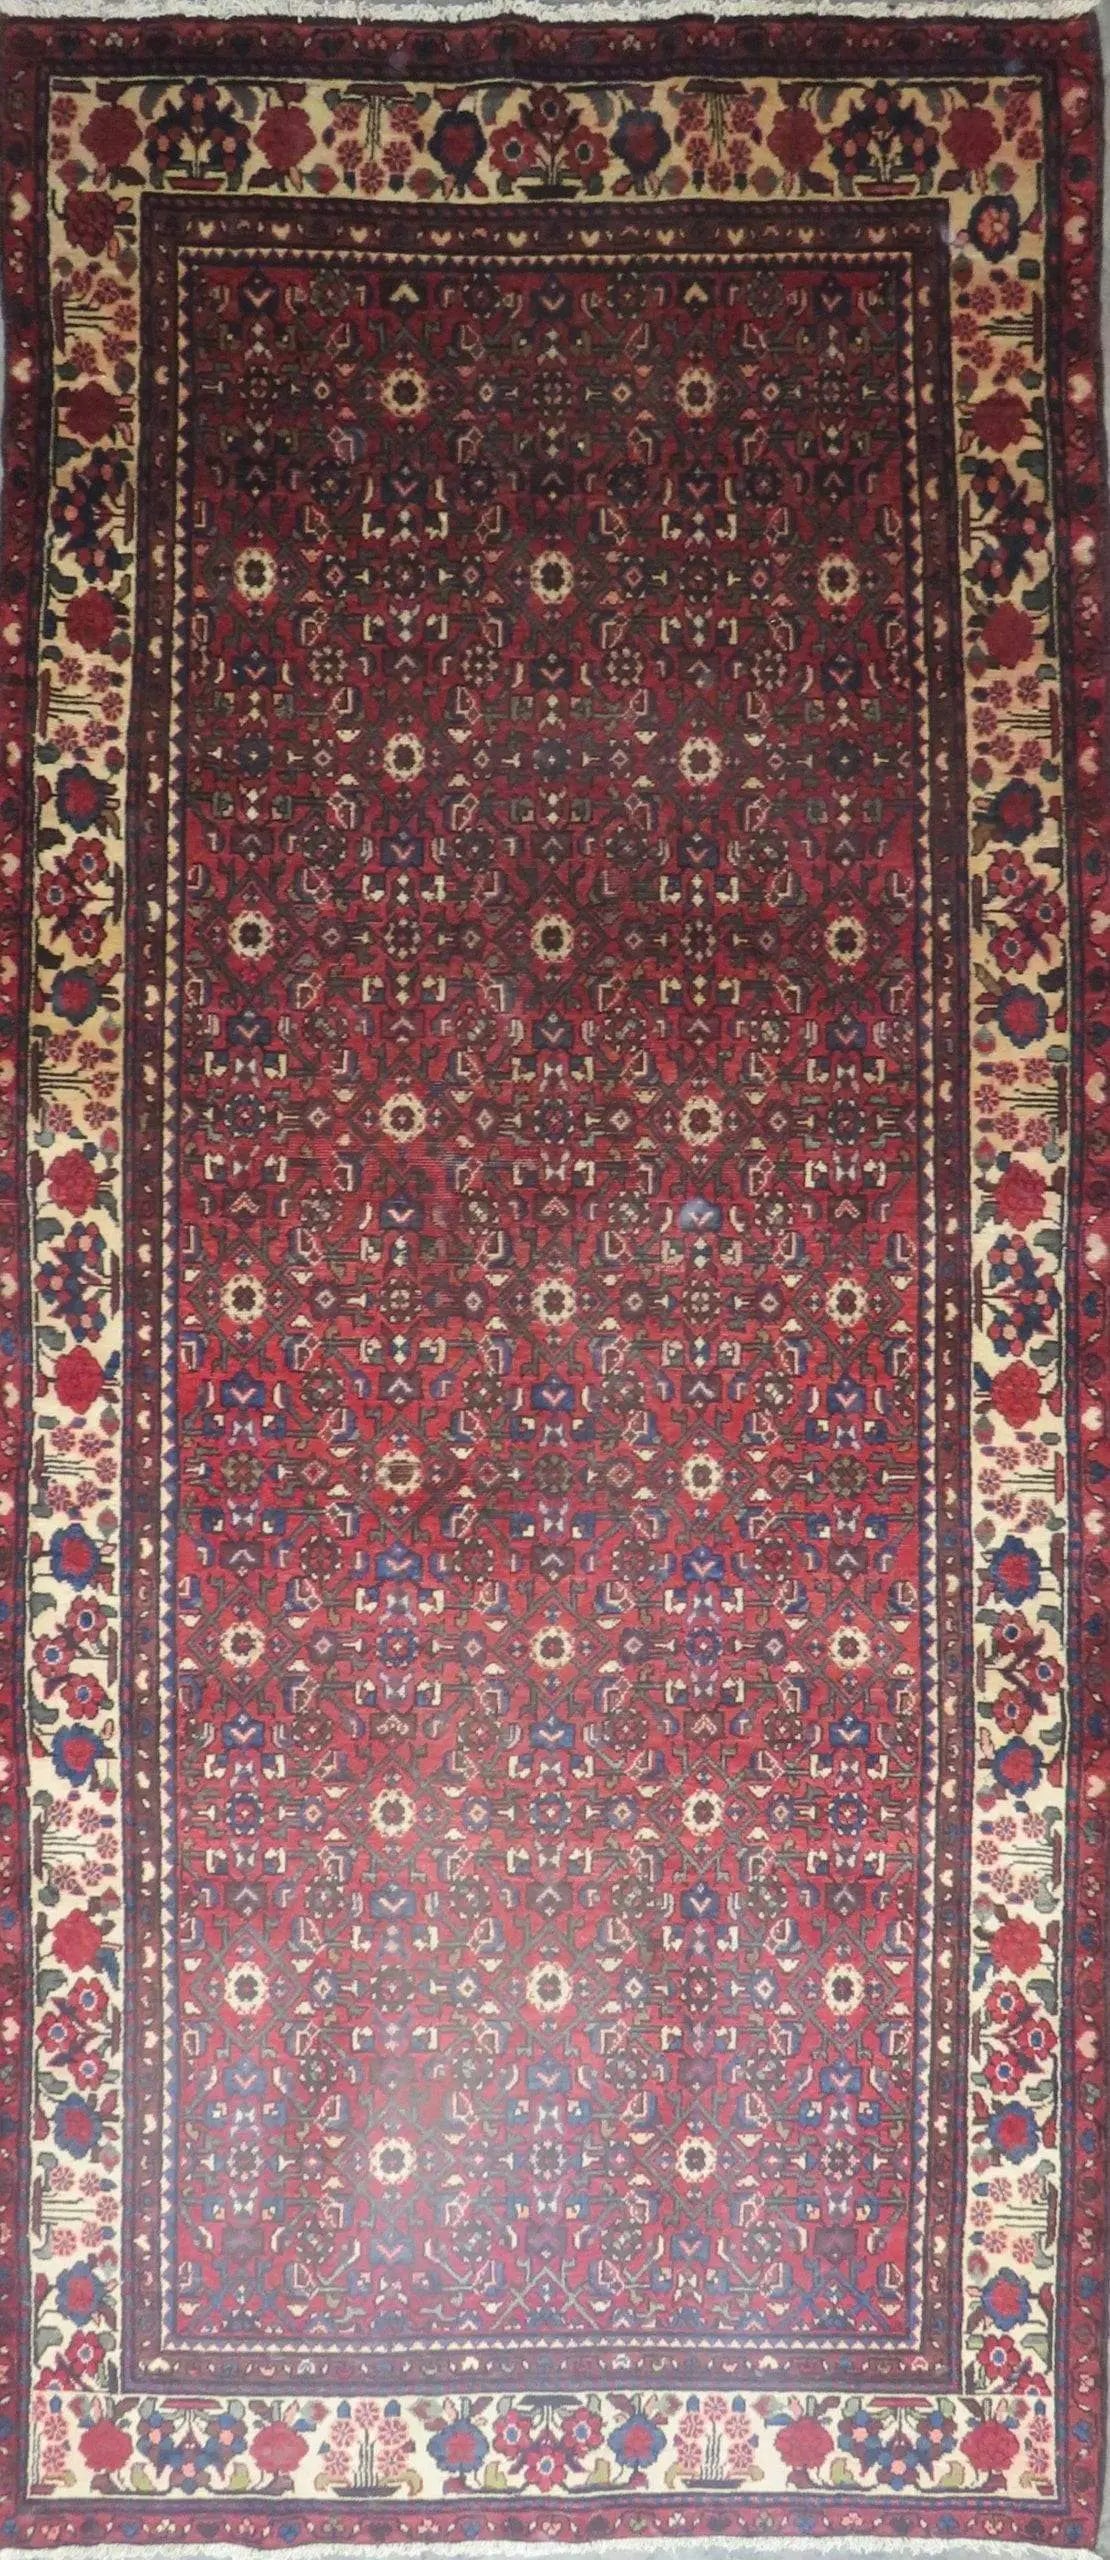 Hand-Knotted Persian Wool Rug _ Luxurious Vintage Design, 10'9" x 4'9", Artisan Crafted